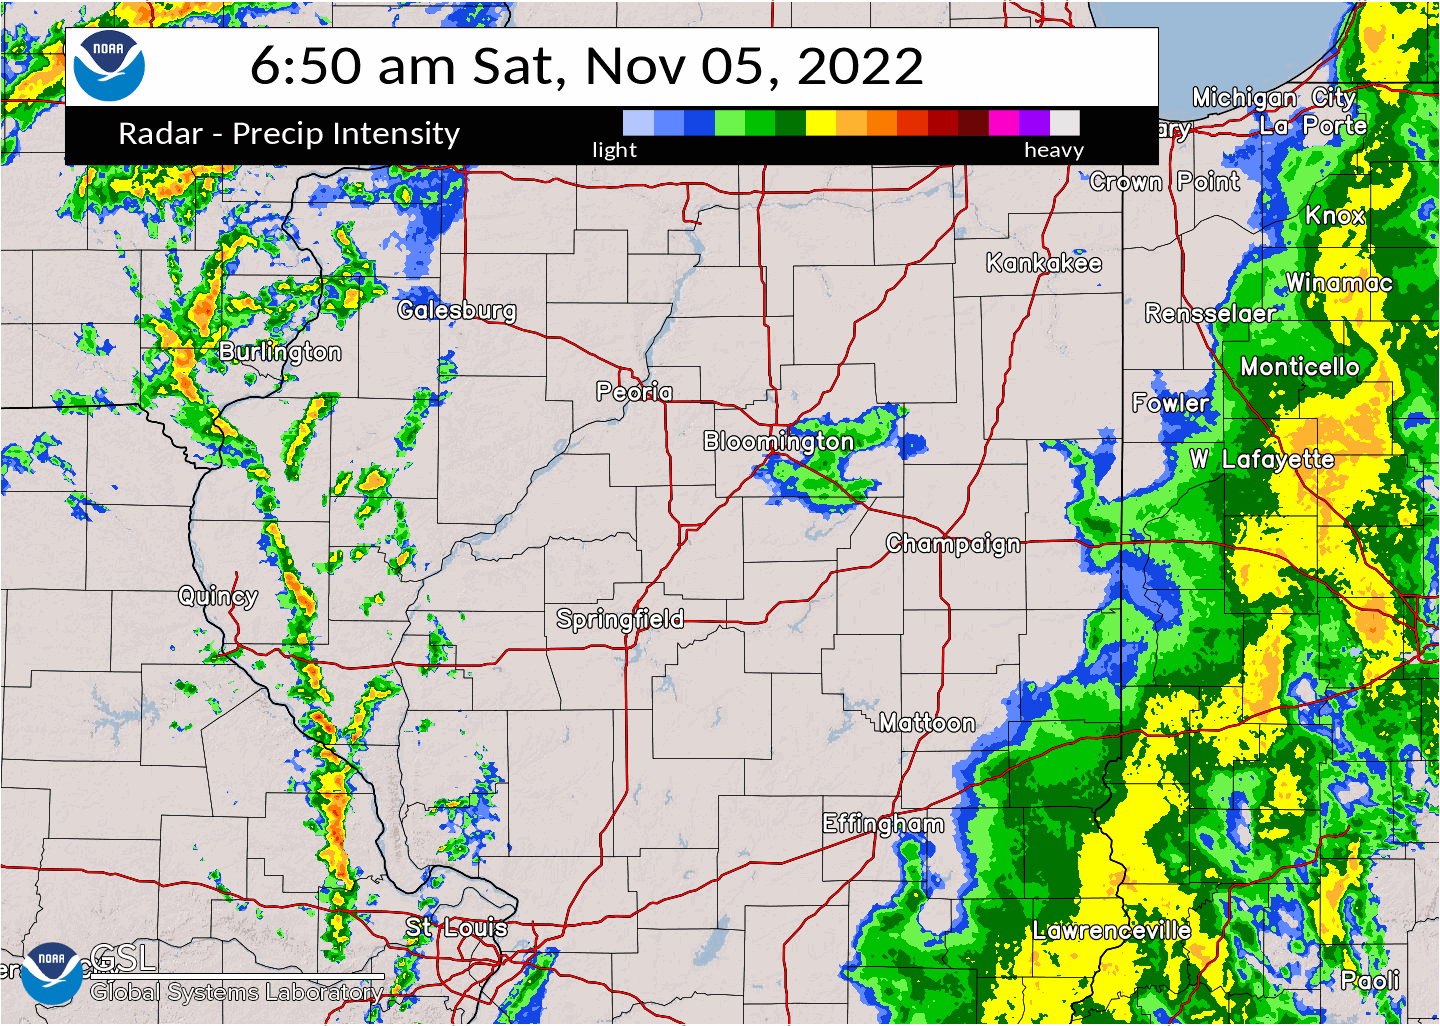 Radar loop from 6:50 am to 10:50 am